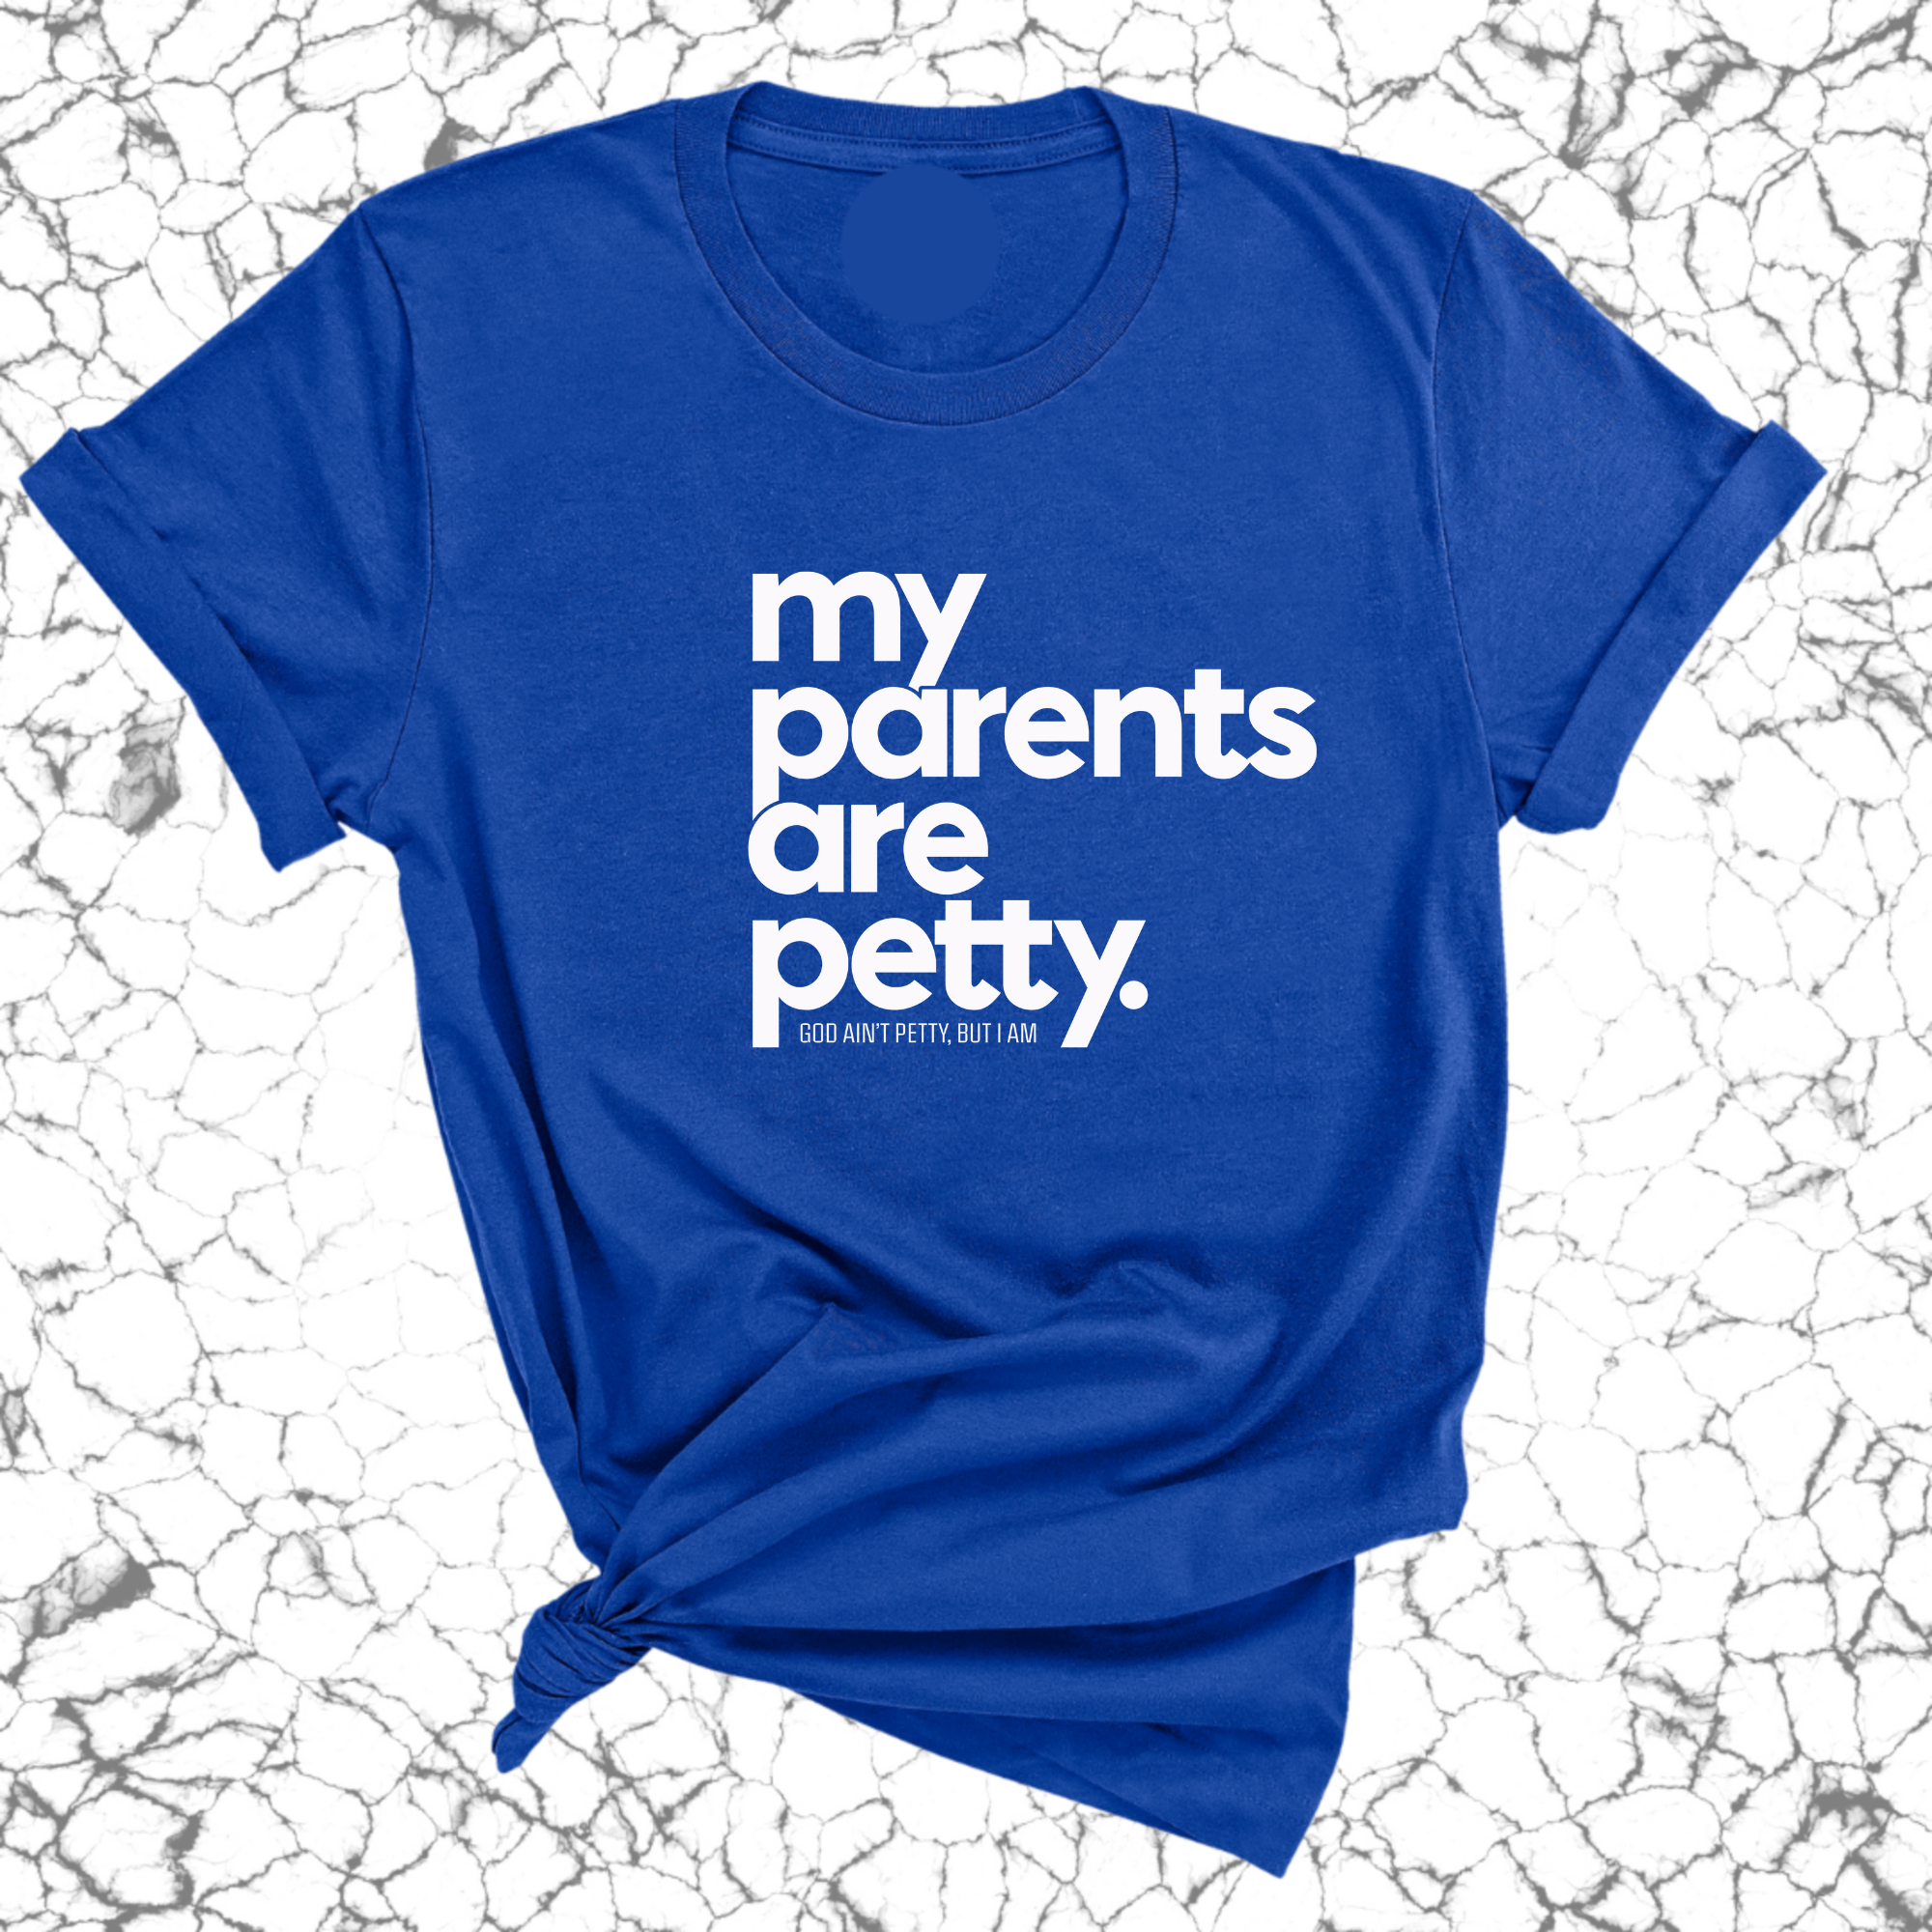 My parents are petty Unisex Tee-T-Shirt-The Original God Ain't Petty But I Am